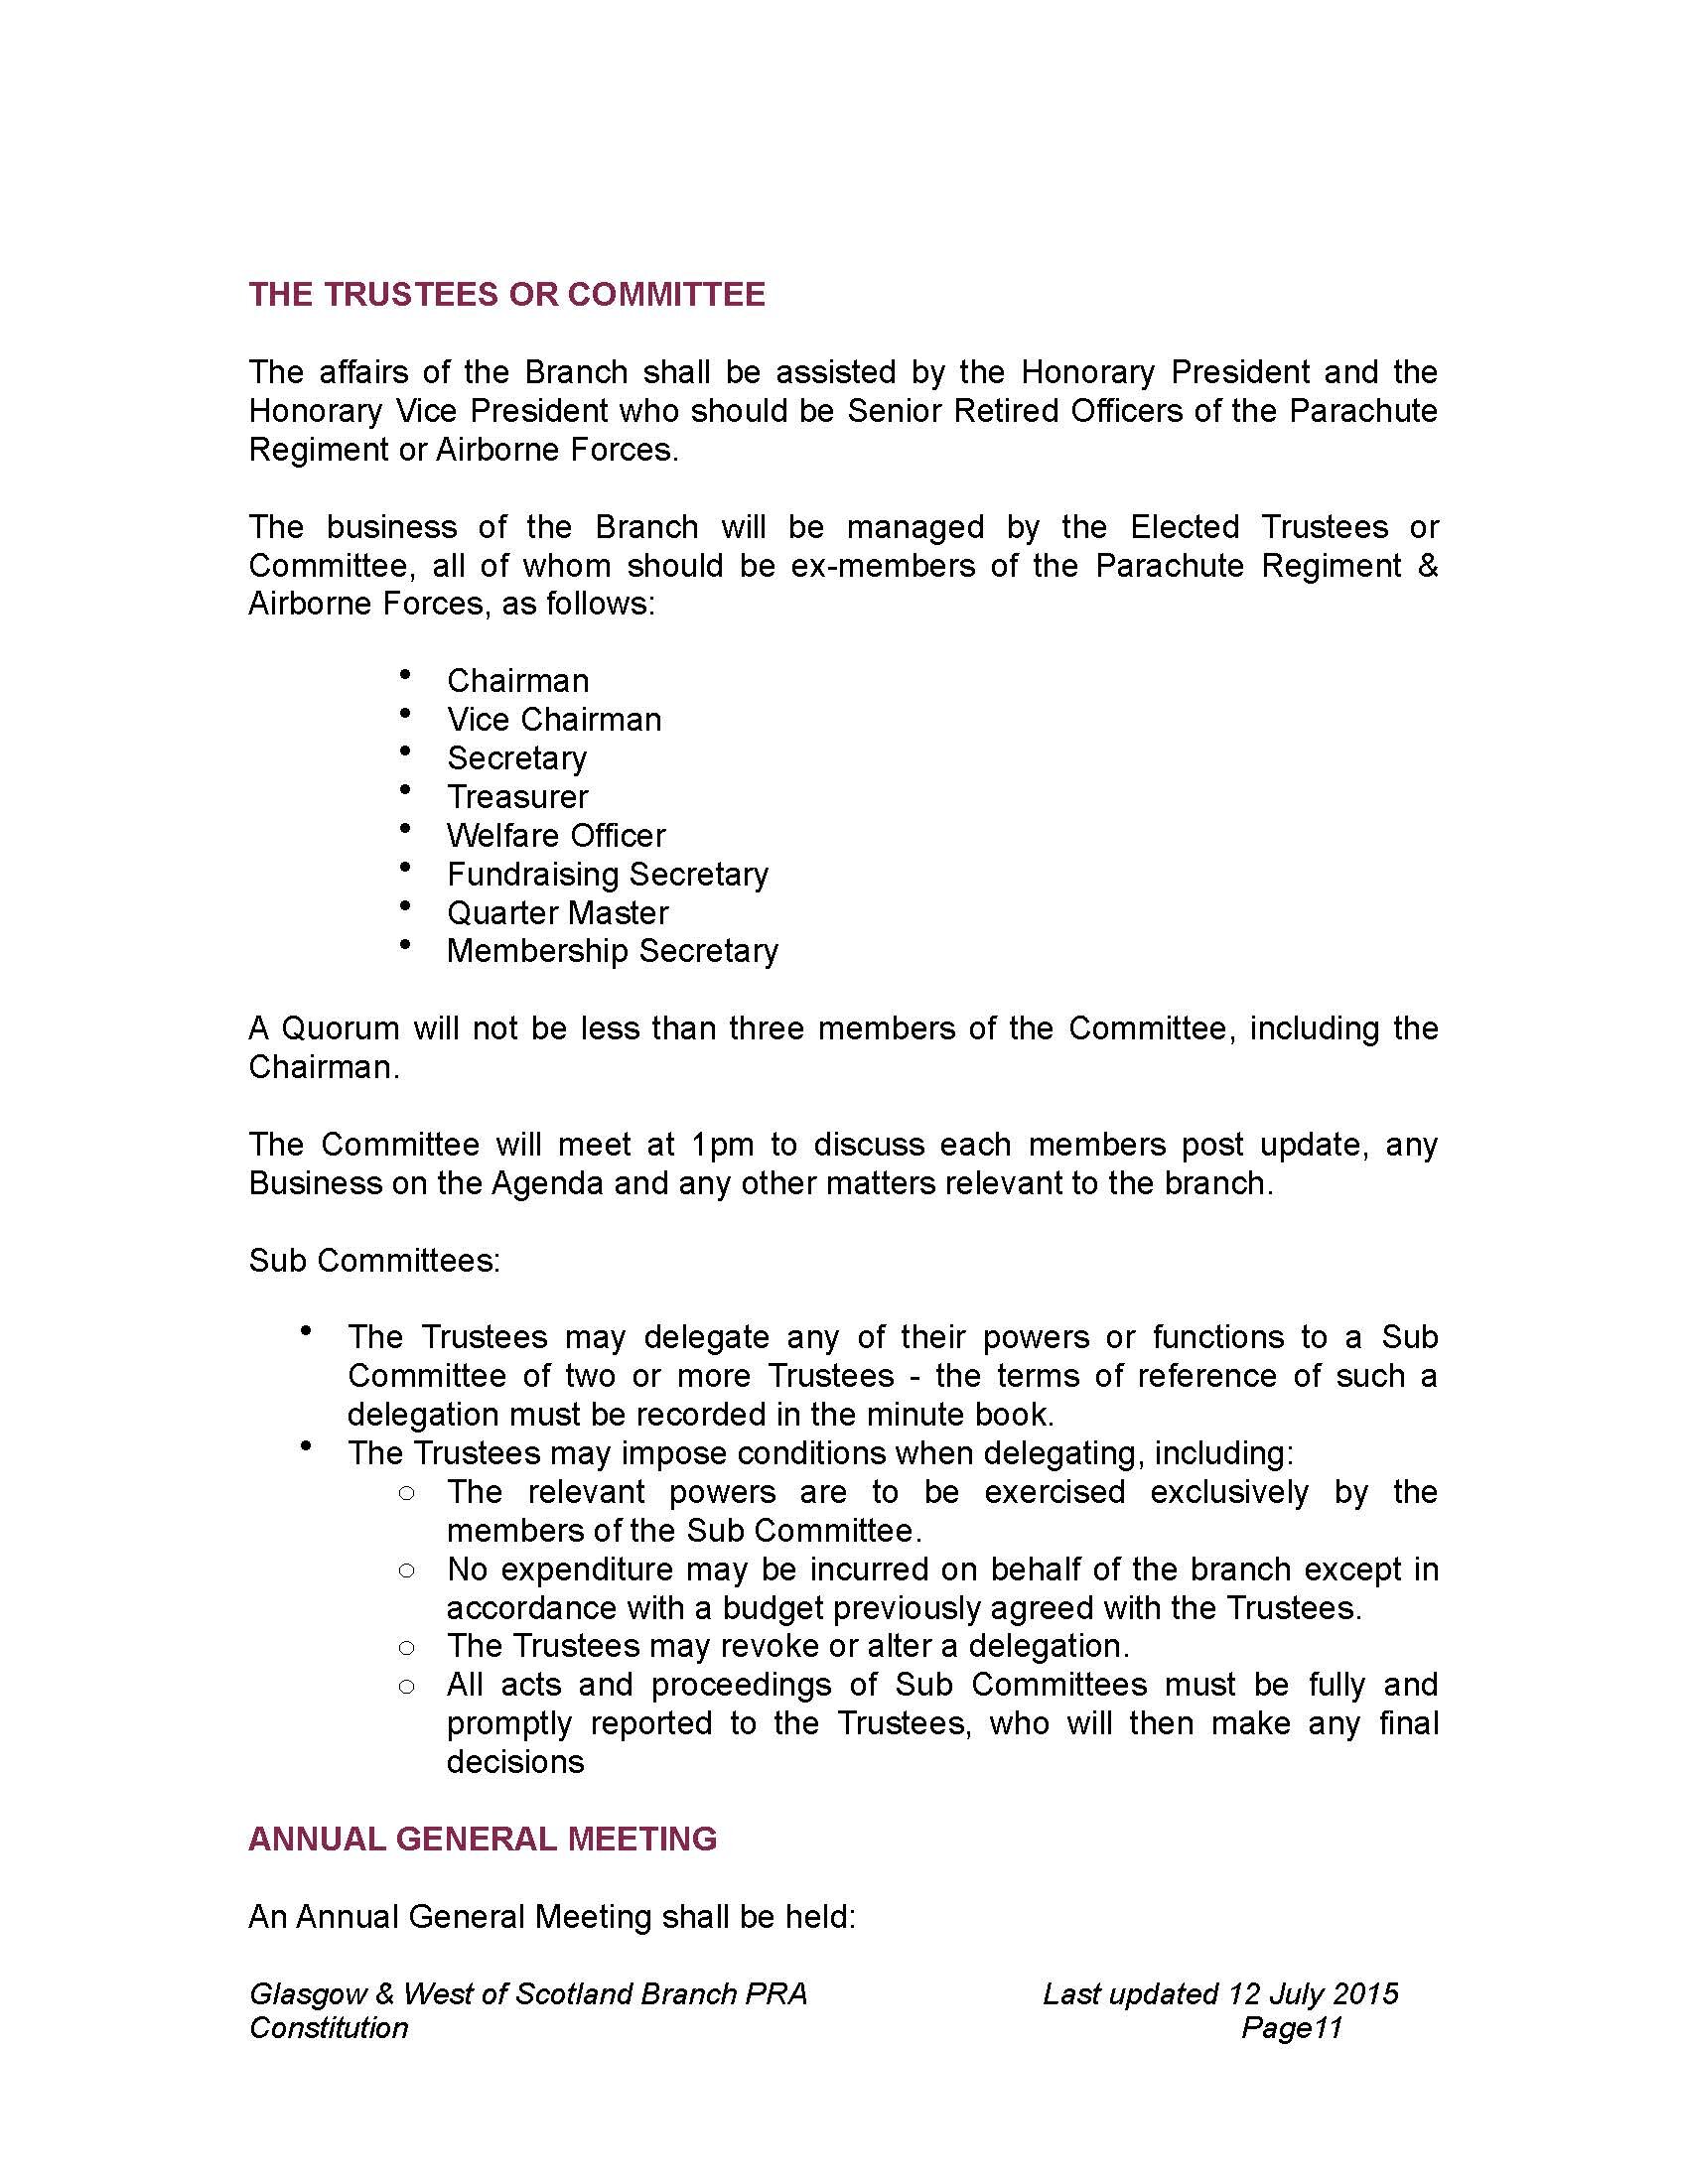 The Constitution of Glasgow & West  of Scotland Branch PRA July  2015_Page_07.jpg